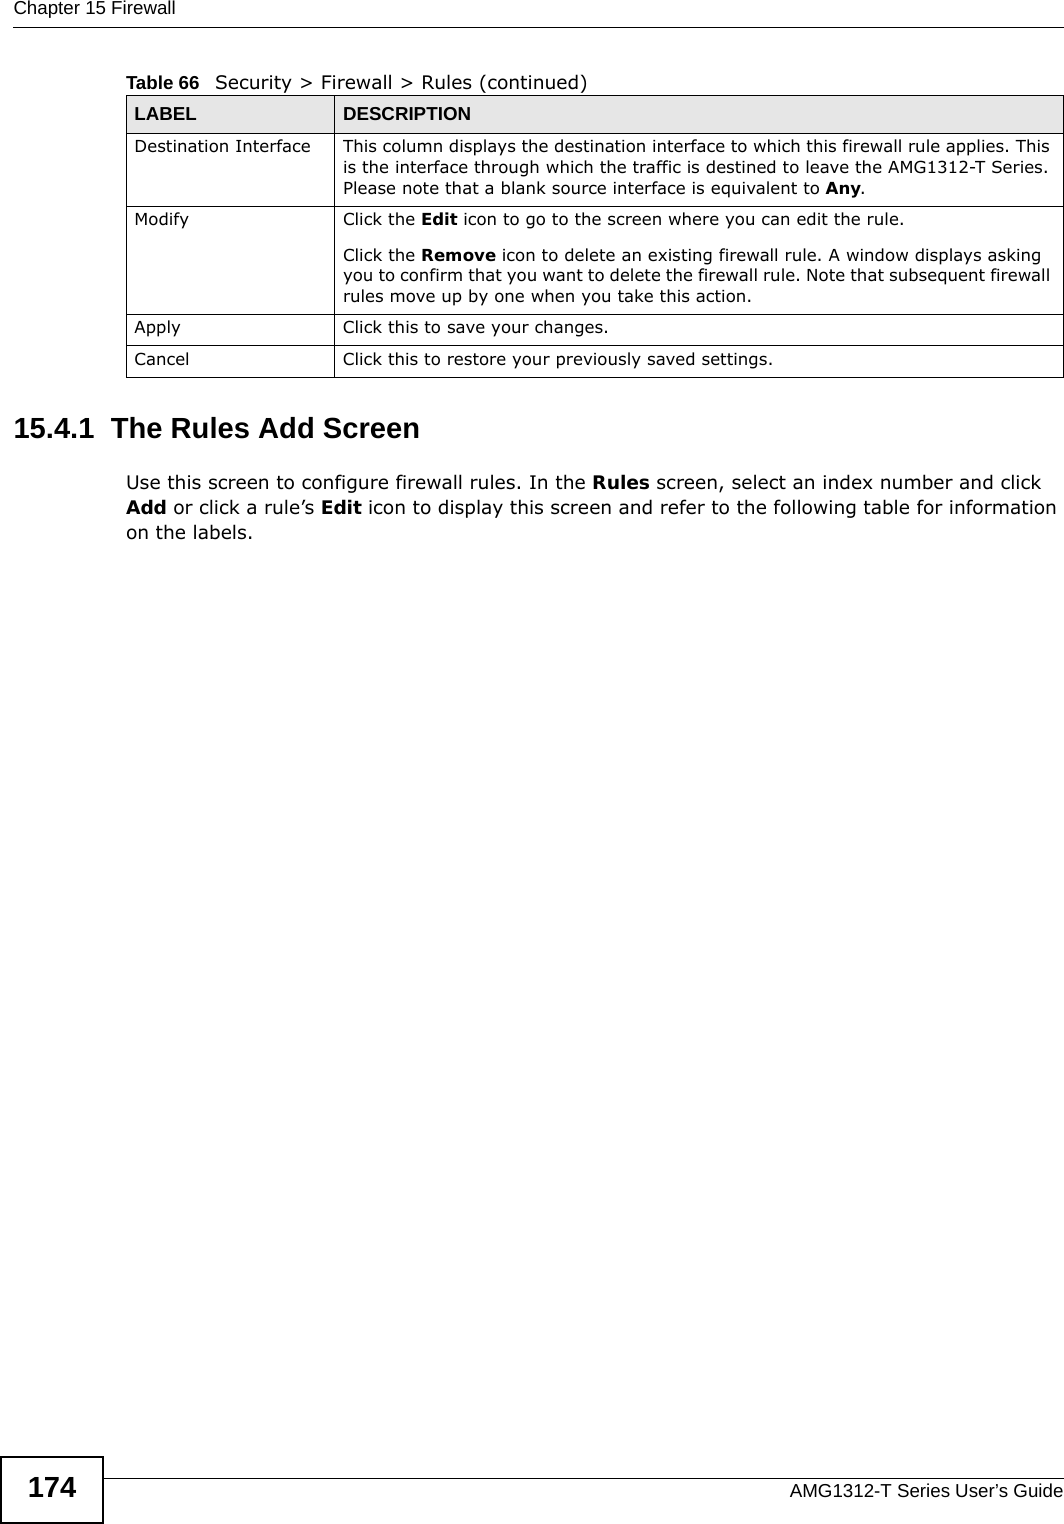 Chapter 15 FirewallAMG1312-T Series User’s Guide17415.4.1  The Rules Add ScreenUse this screen to configure firewall rules. In the Rules screen, select an index number and click Add or click a rule’s Edit icon to display this screen and refer to the following table for information on the labels.Destination Interface This column displays the destination interface to which this firewall rule applies. This is the interface through which the traffic is destined to leave the AMG1312-T Series. Please note that a blank source interface is equivalent to Any.Modify Click the Edit icon to go to the screen where you can edit the rule.Click the Remove icon to delete an existing firewall rule. A window displays asking you to confirm that you want to delete the firewall rule. Note that subsequent firewall rules move up by one when you take this action.Apply Click this to save your changes.Cancel Click this to restore your previously saved settings.Table 66   Security &gt; Firewall &gt; Rules (continued)LABEL DESCRIPTION